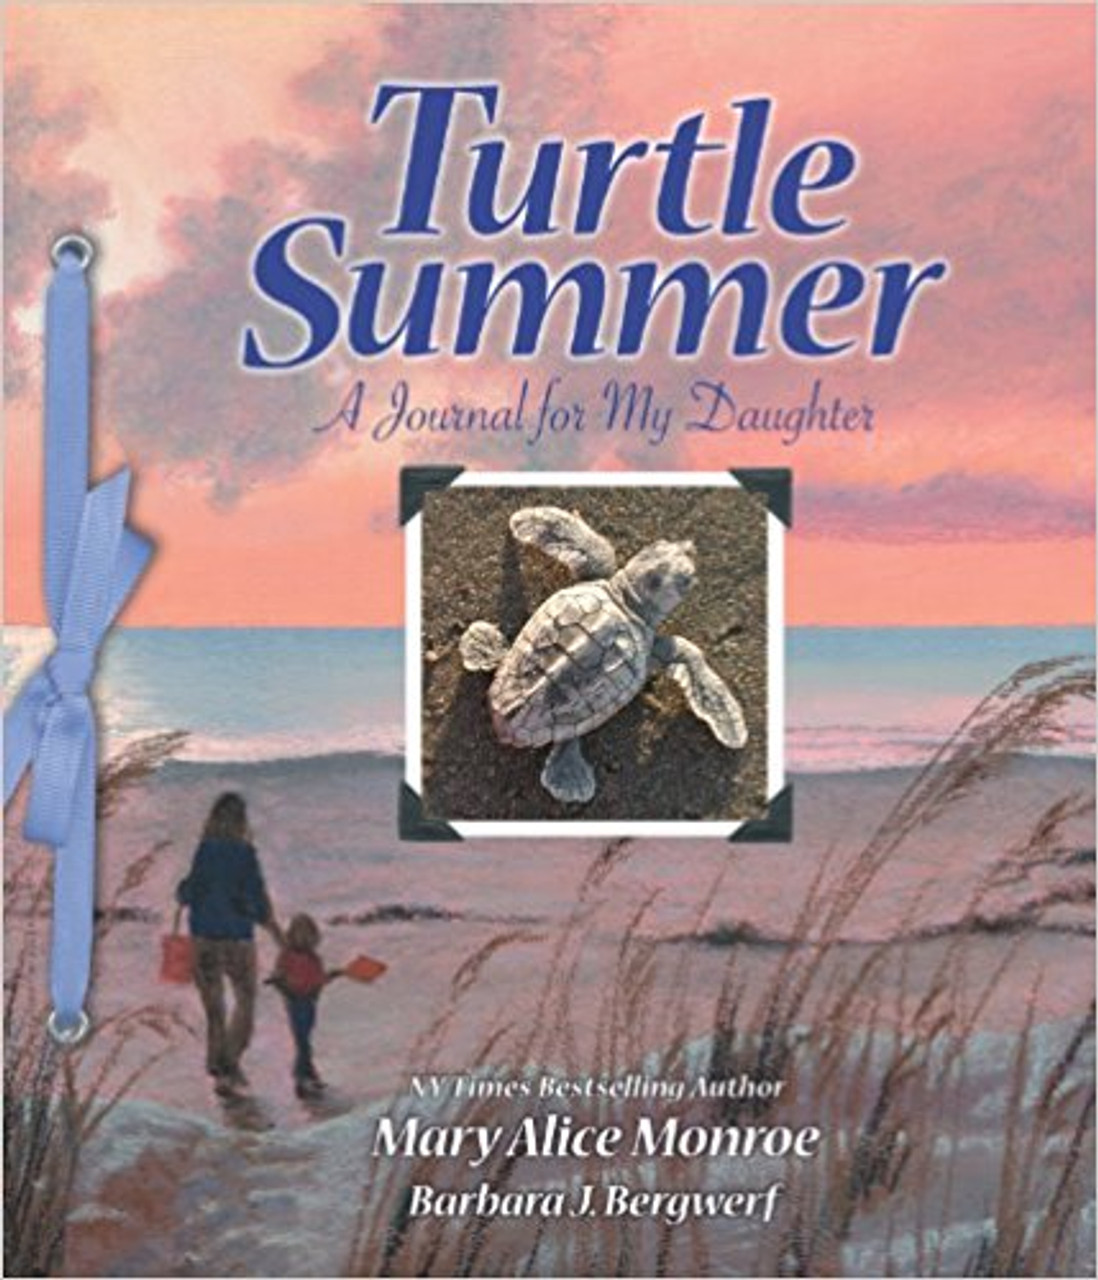 Turtle Summer: A Journal For My Daughter by Mary Alice Monroe